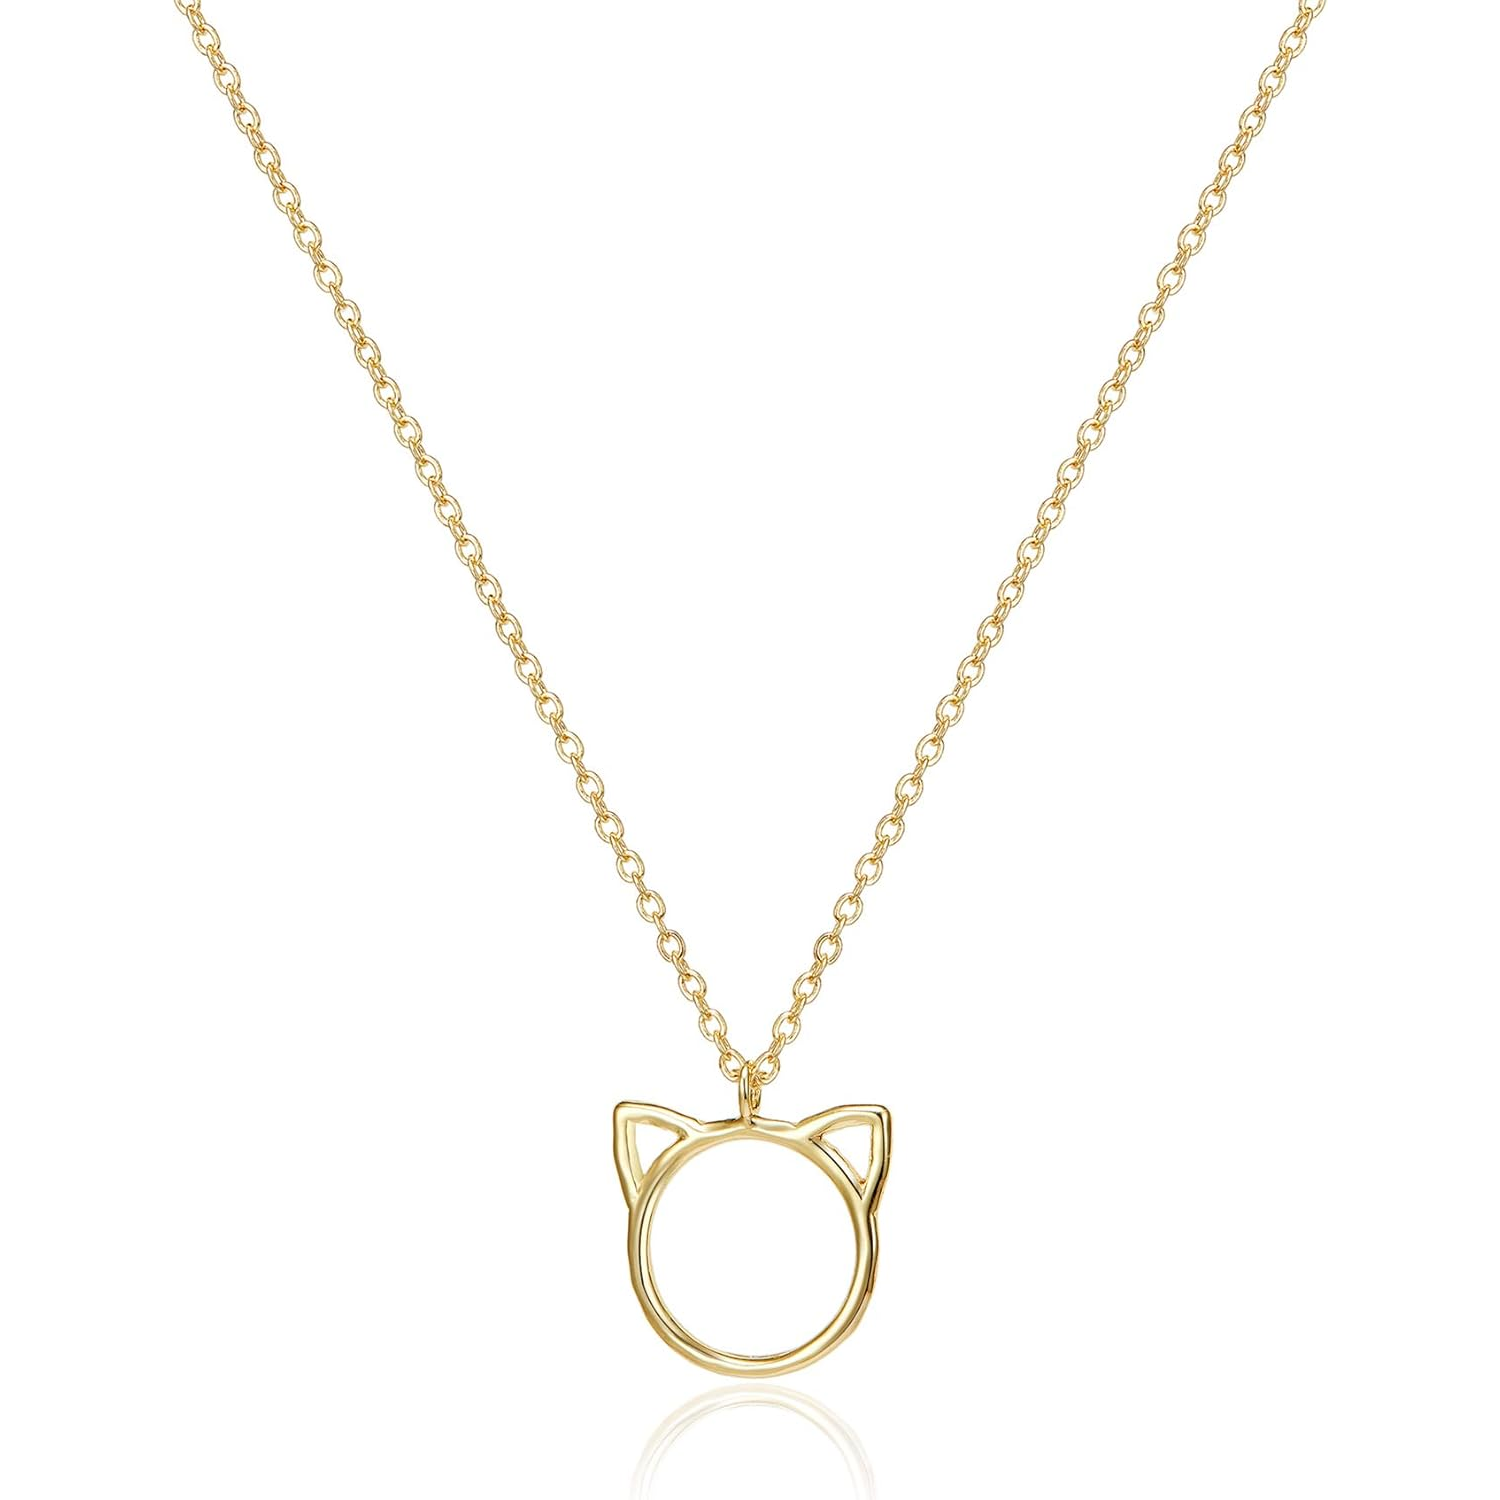 NEW 14k Gold Plated Cat Pendant Necklace